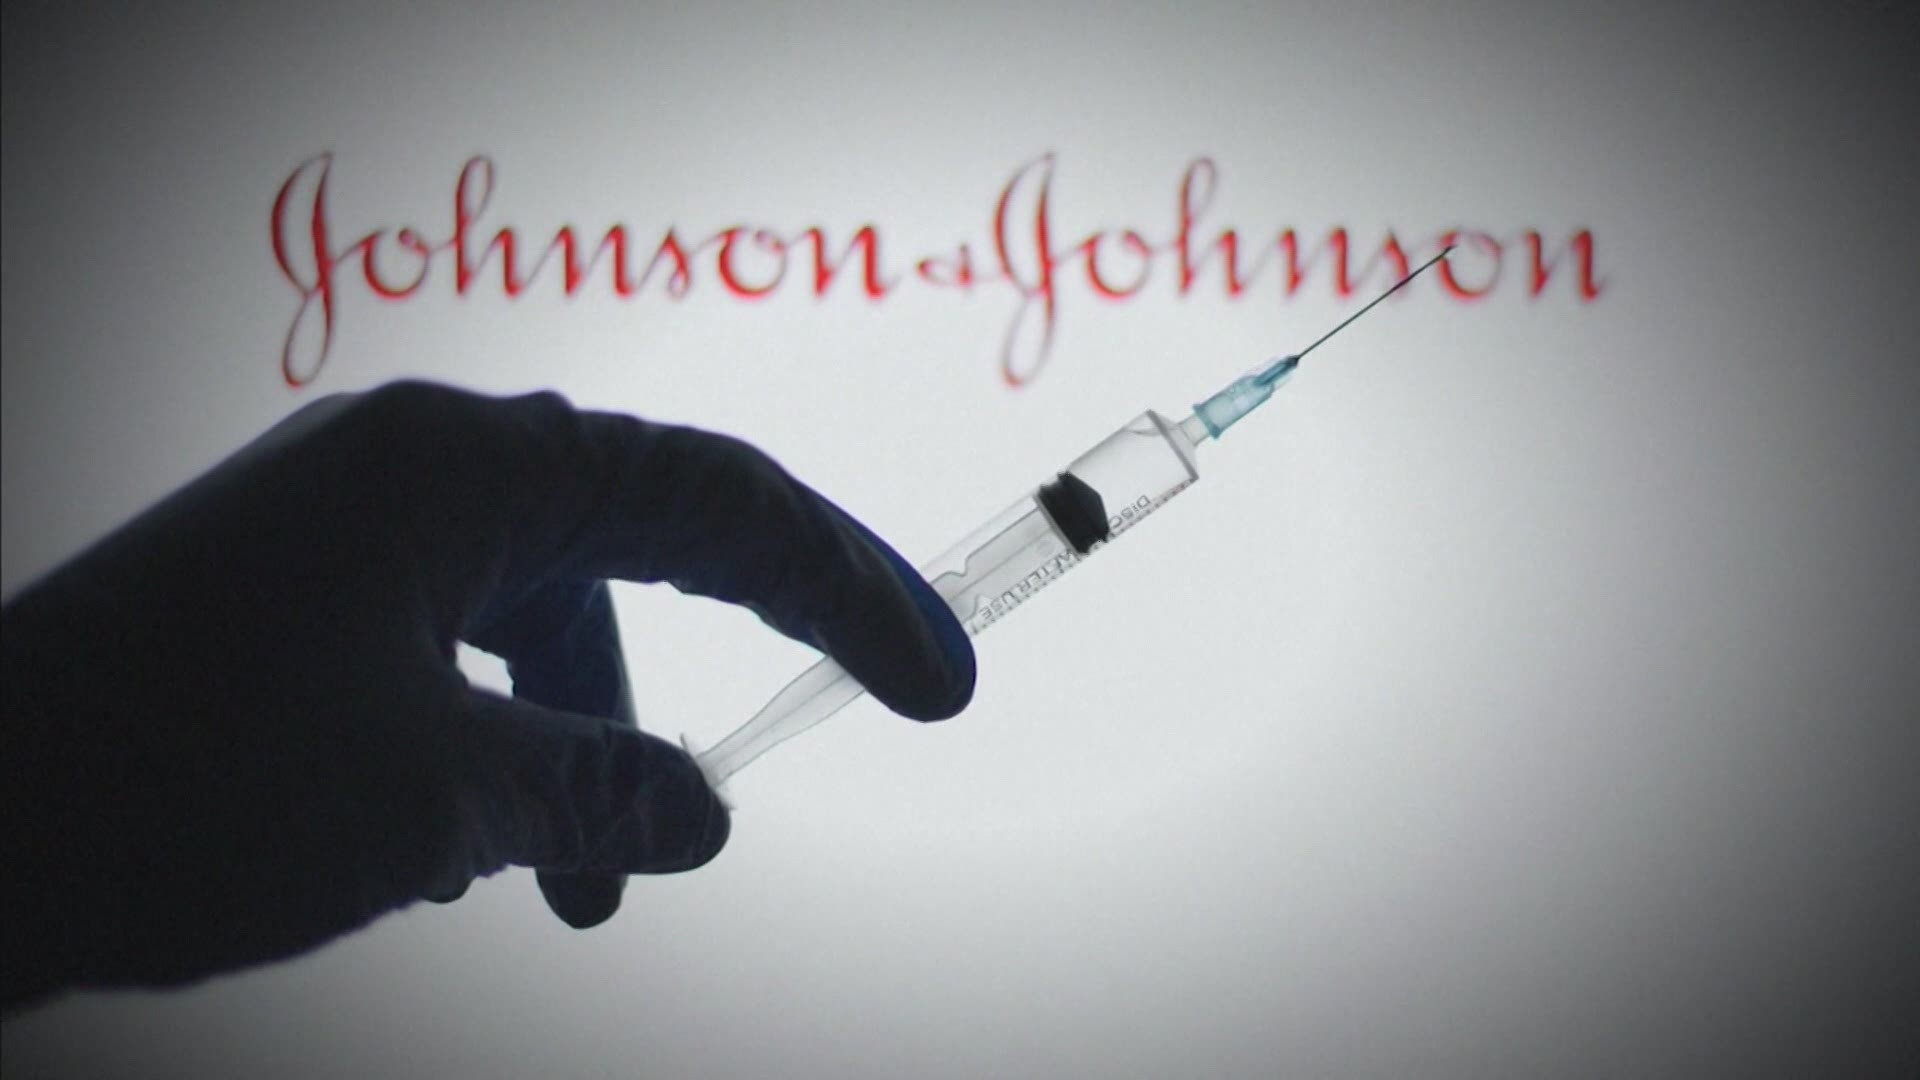 U.S. health advisers urged resuming COVID-19 vaccinations with Johnson & Johnson's single-dose shot, saying its benefits outweigh a rare risk of blood clots